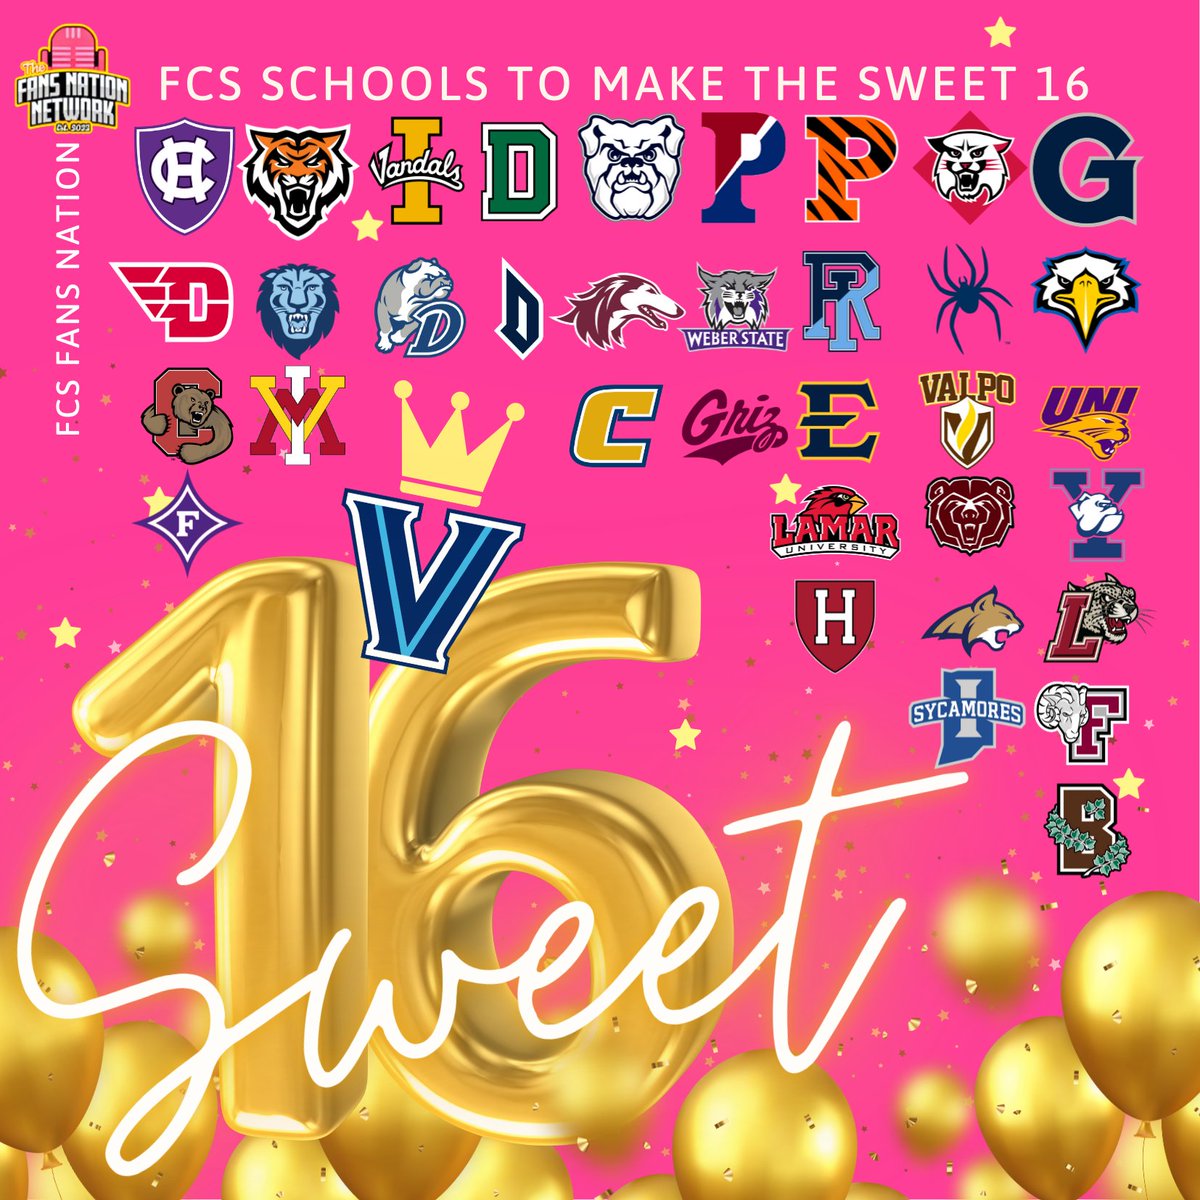 FCS Schools that have made the #Sweet16 in #MarchMadness,